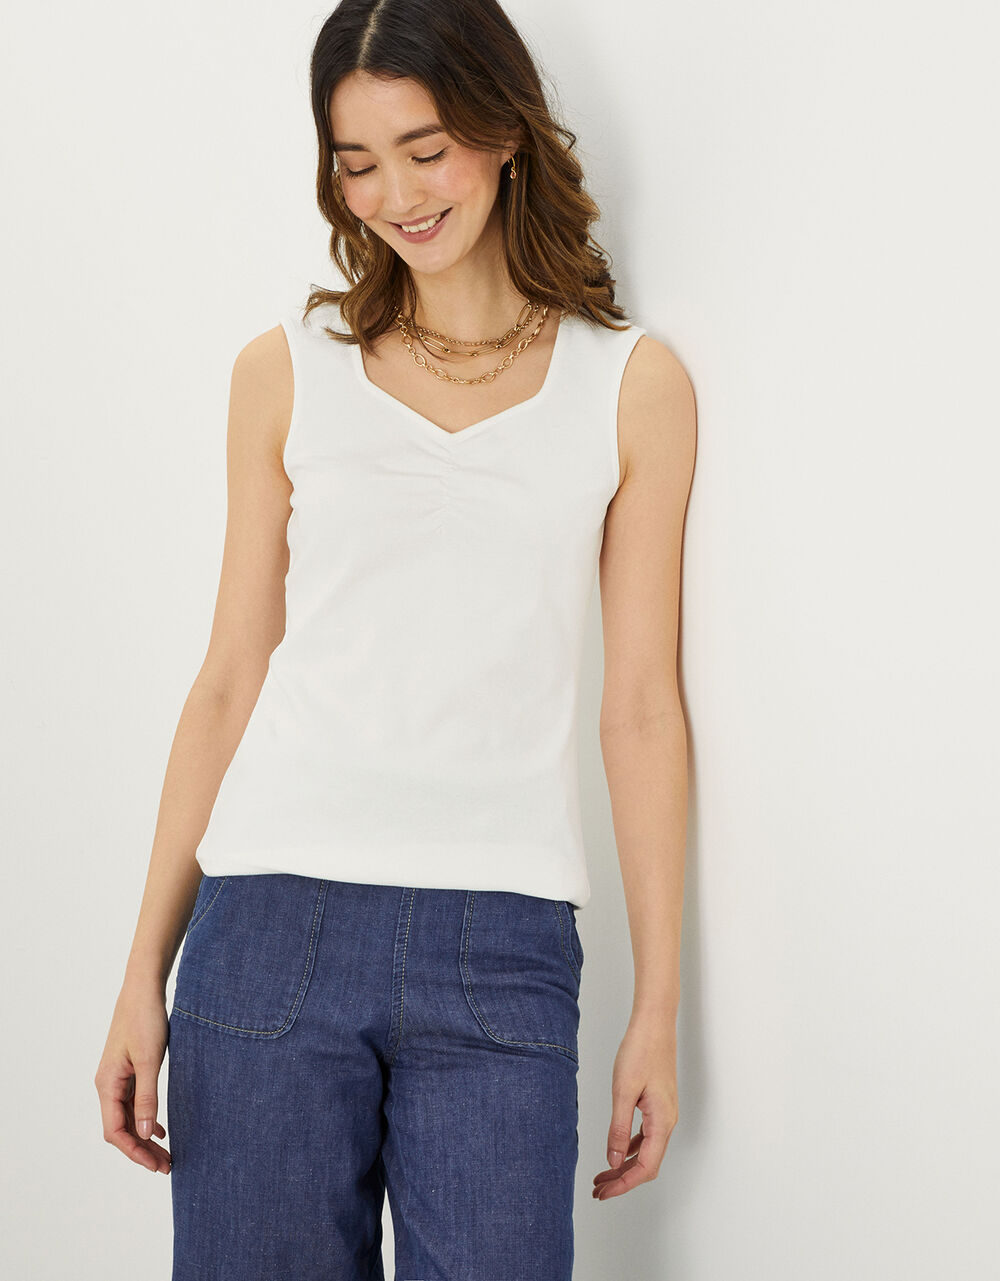 Women Women's Clothing | Cap Sleeve Ruched Jersey Top Ivory - GG93439